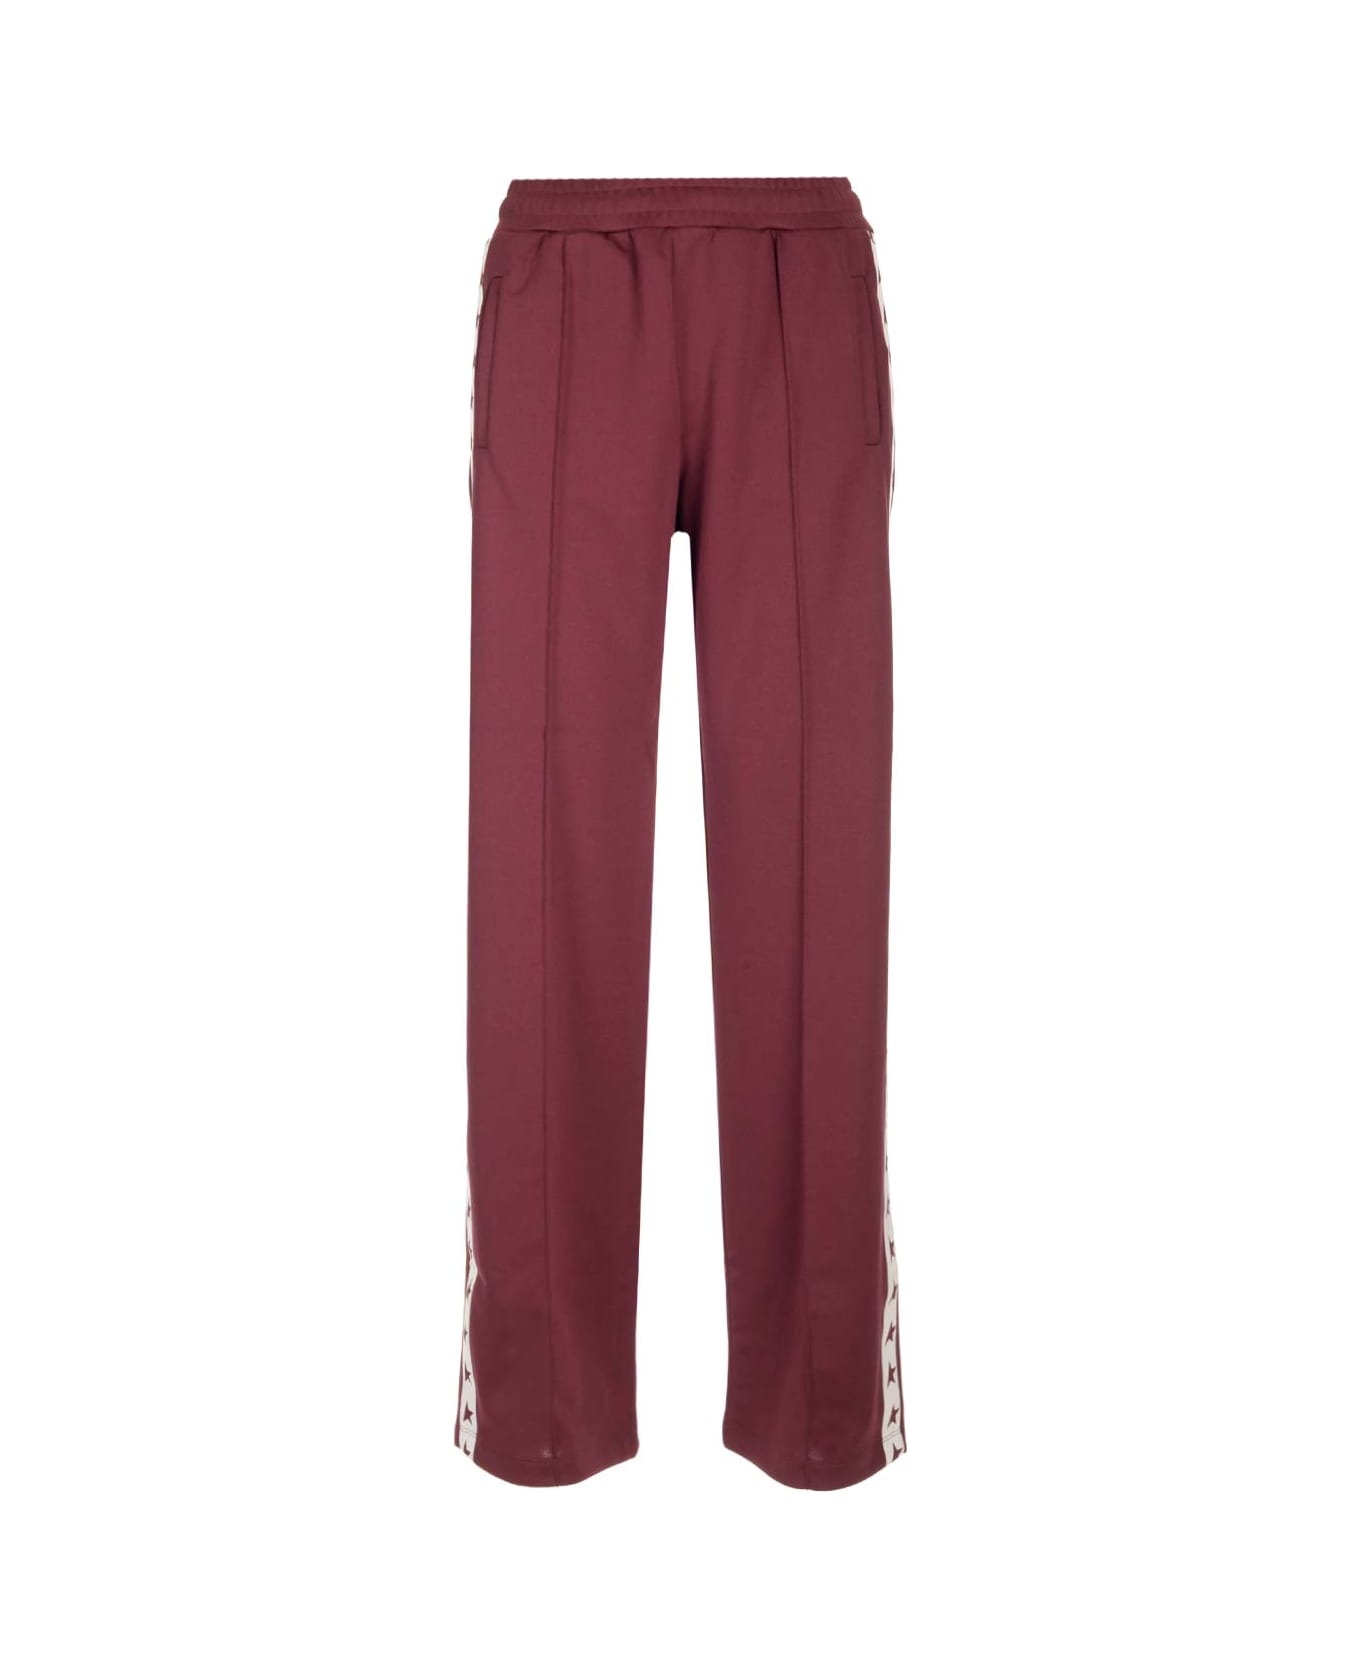 Golden Goose Burgundy Polyester Pants - Red ボトムス